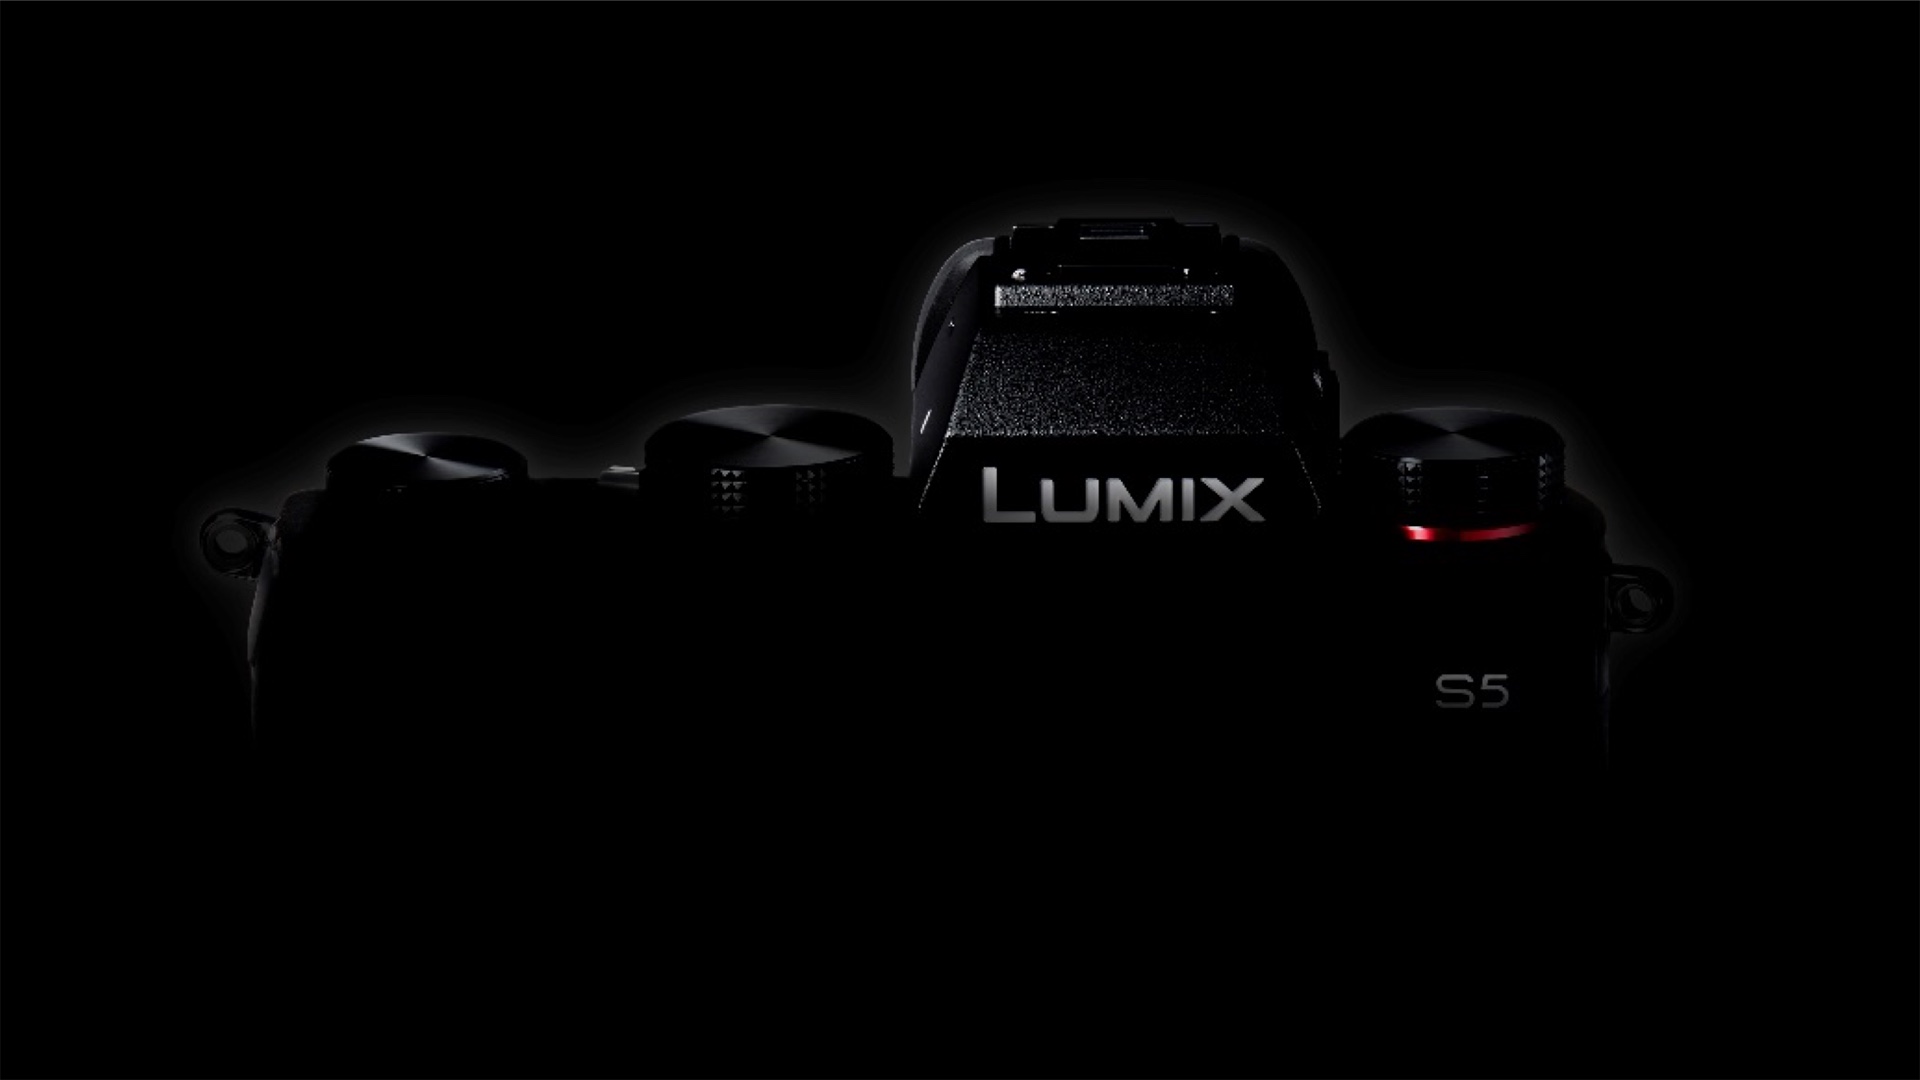 The Panasonic S5 announced: A mysterious new full-frame camera